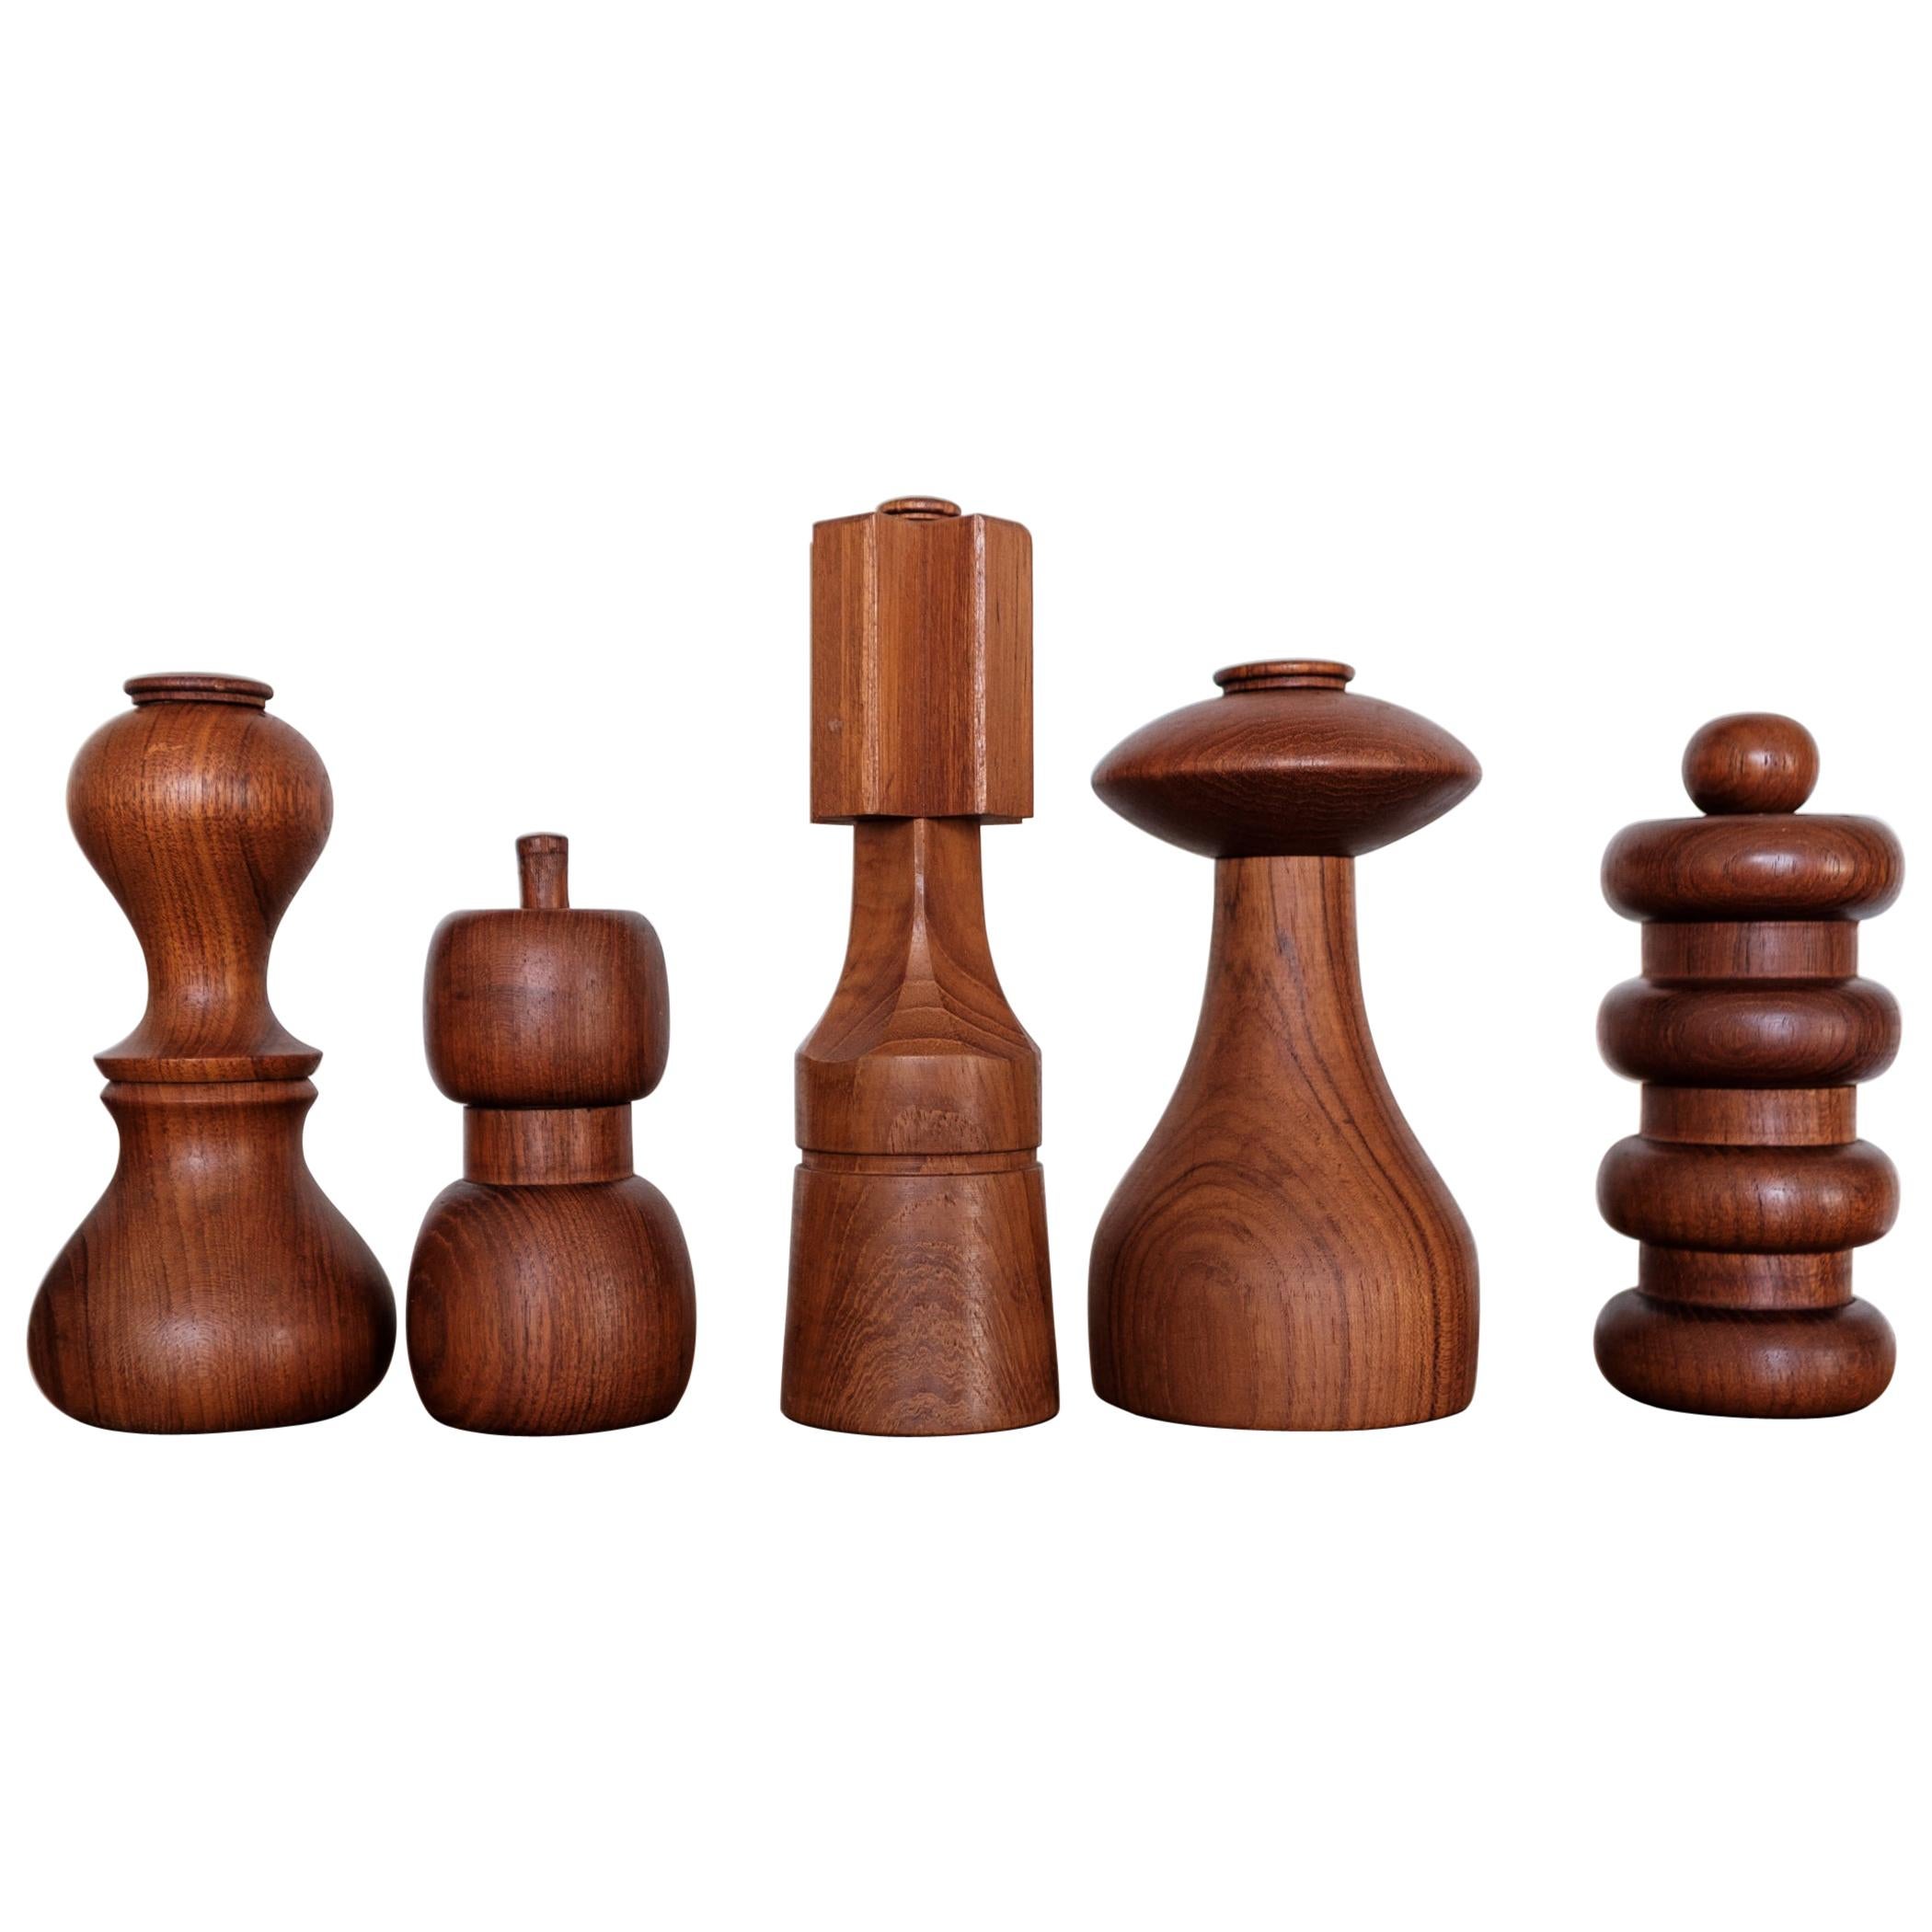 Pepper Mill Collection by Jens H. Quistgaard for Dansk